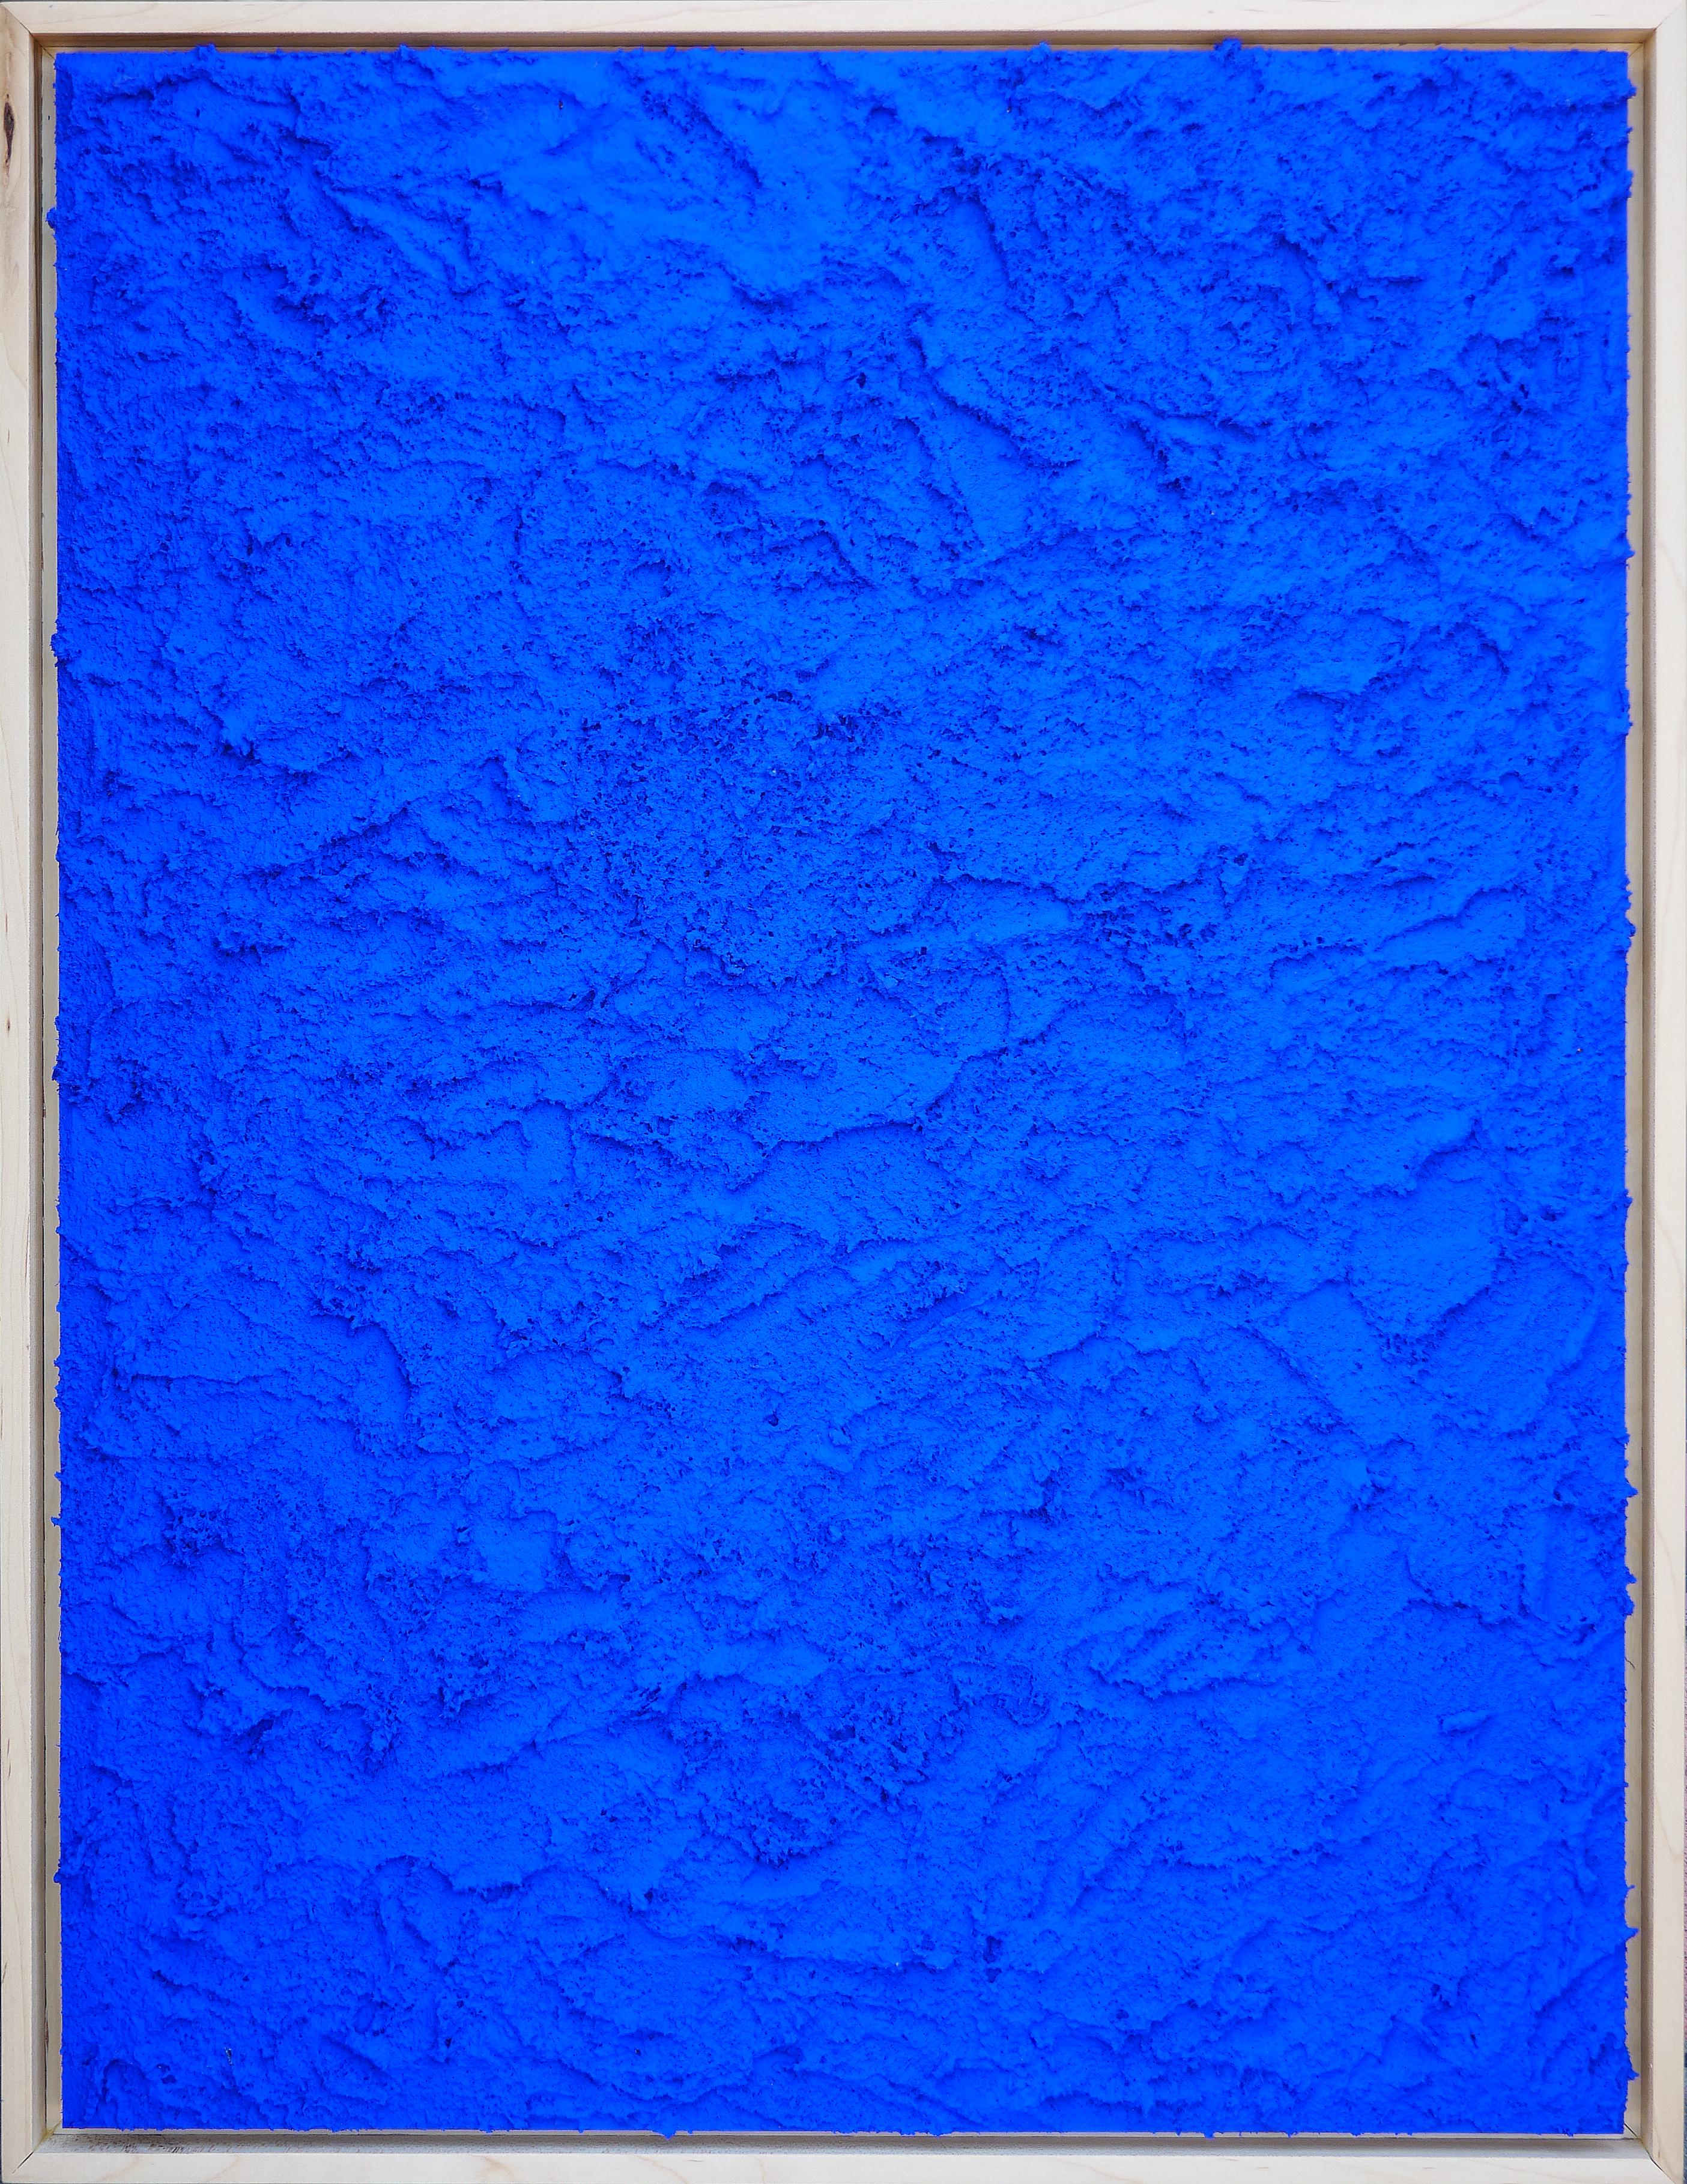 "Small Bay 1" Contemporary Bright Blue Textured Sculptural Topography Painting - Mixed Media Art by Matthew Reeves